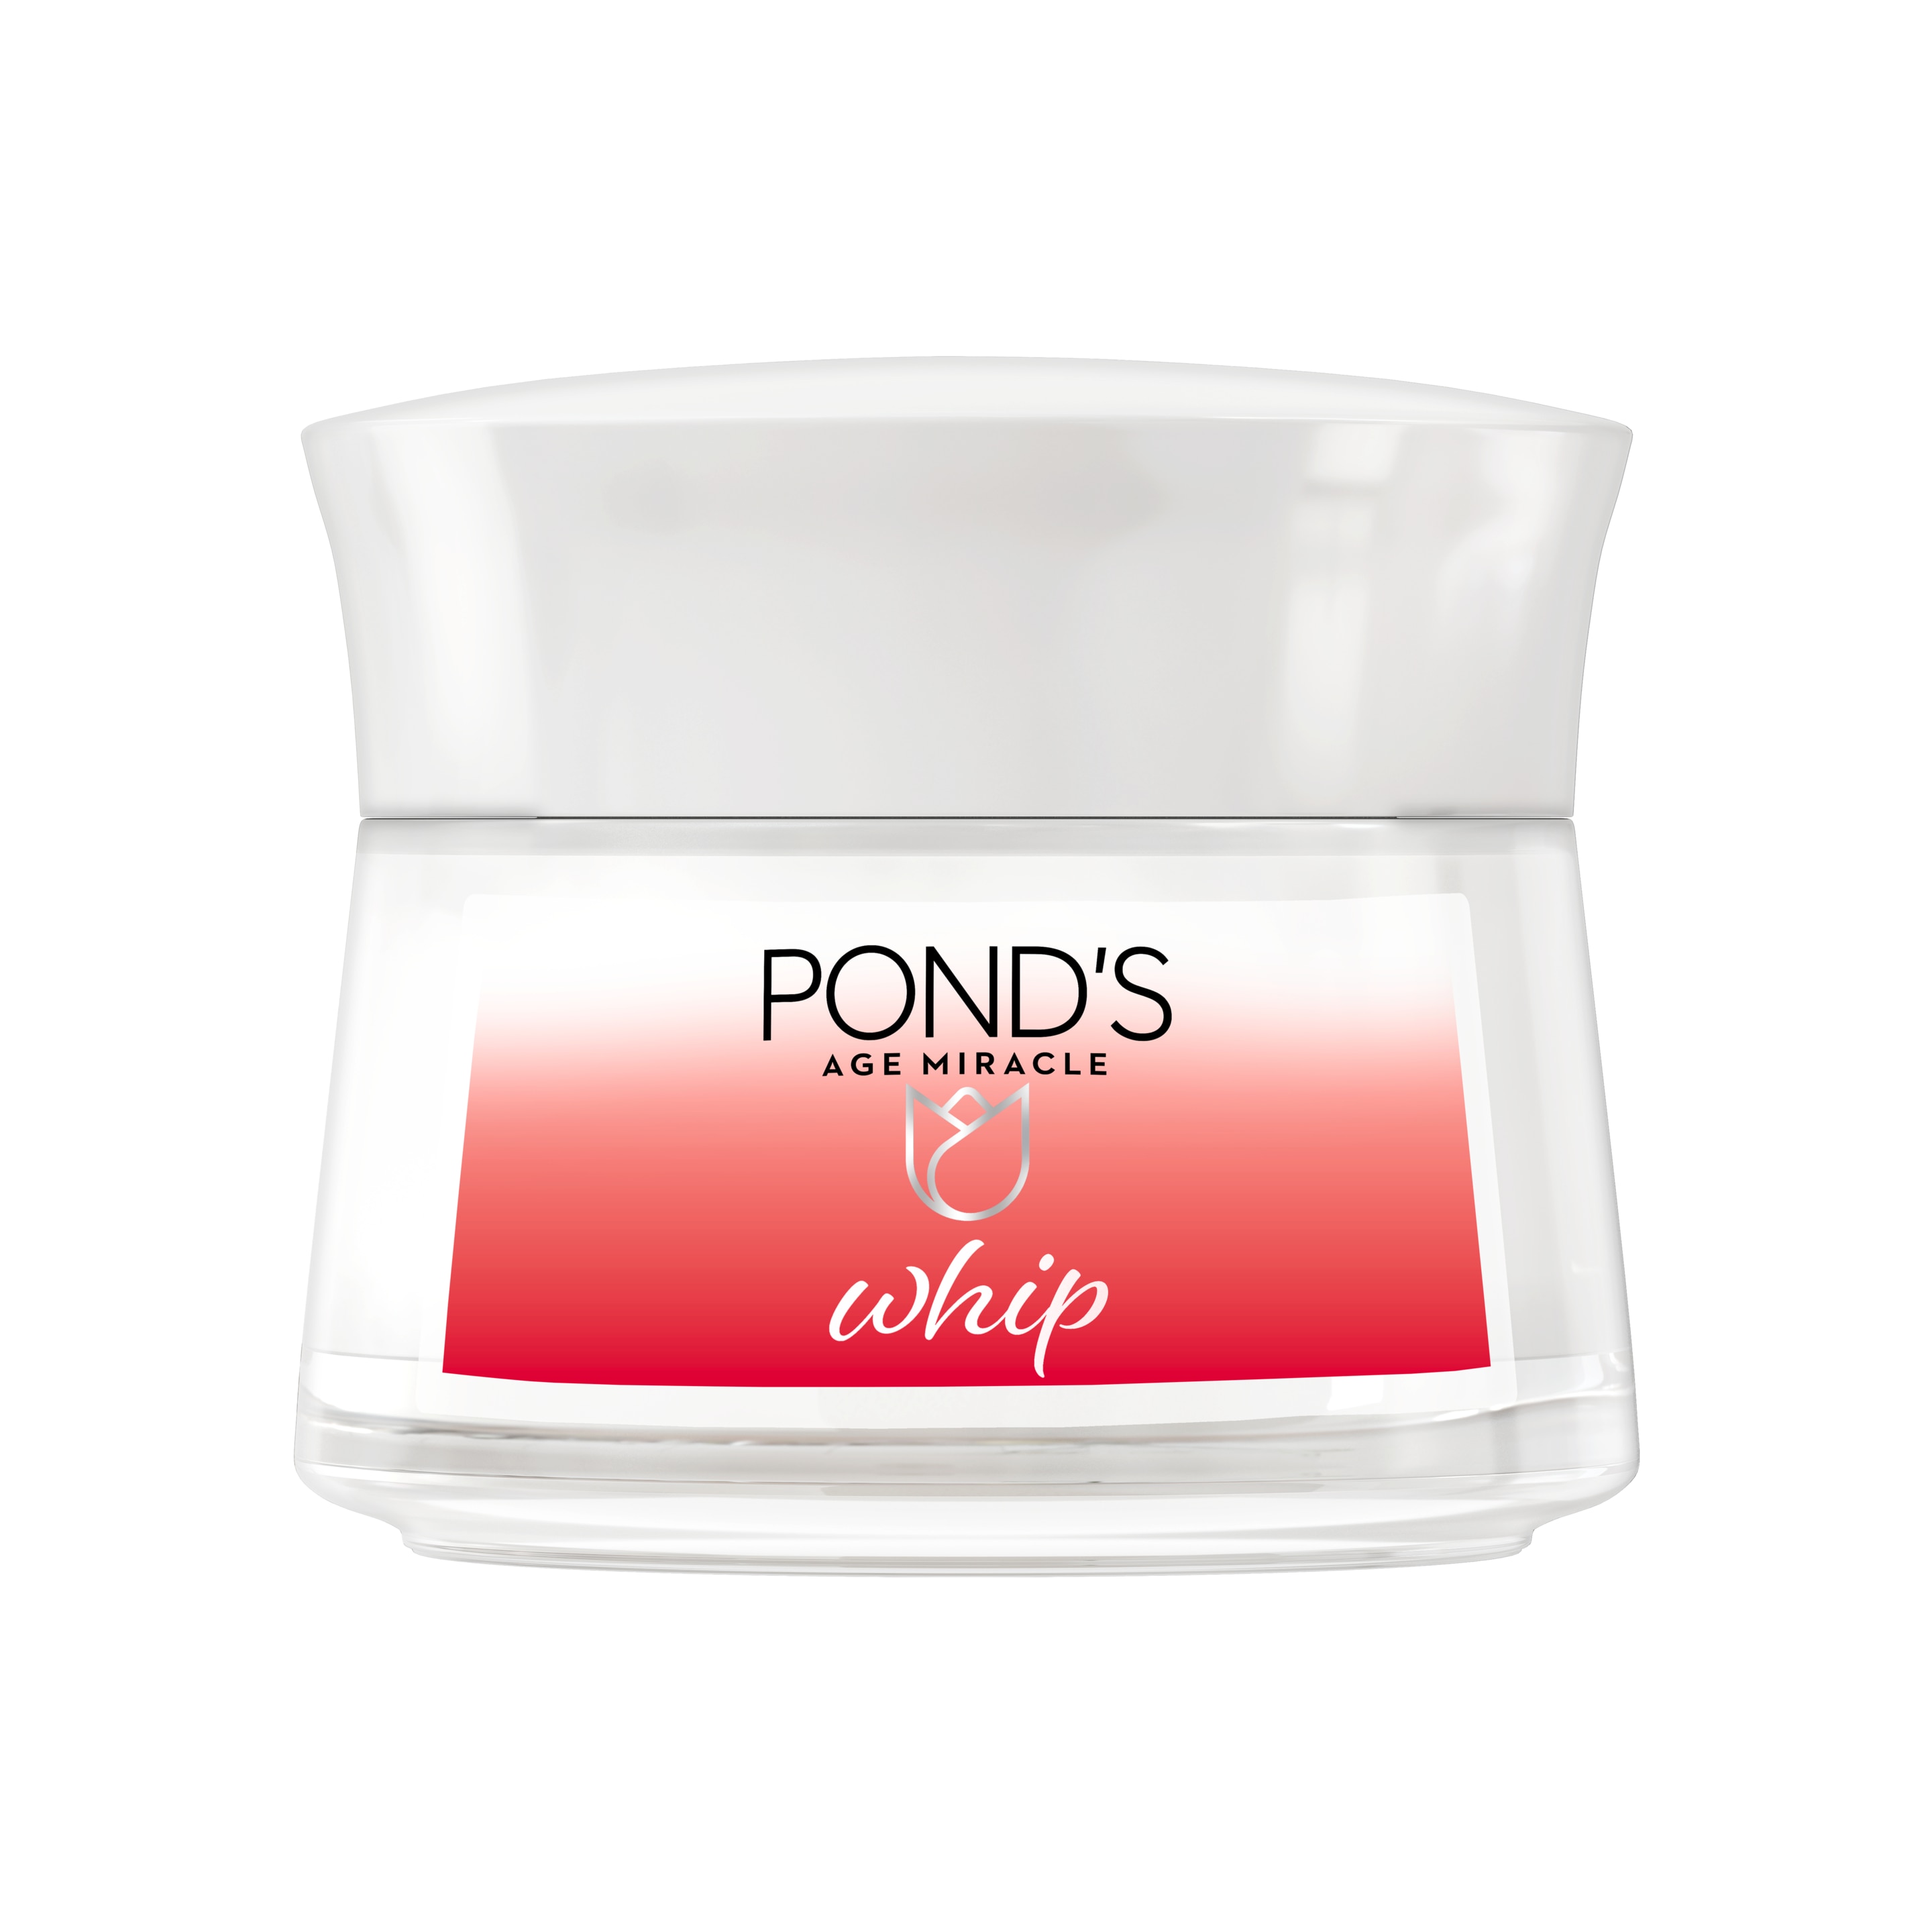 Pond's Age Miracle Whips Day Cream